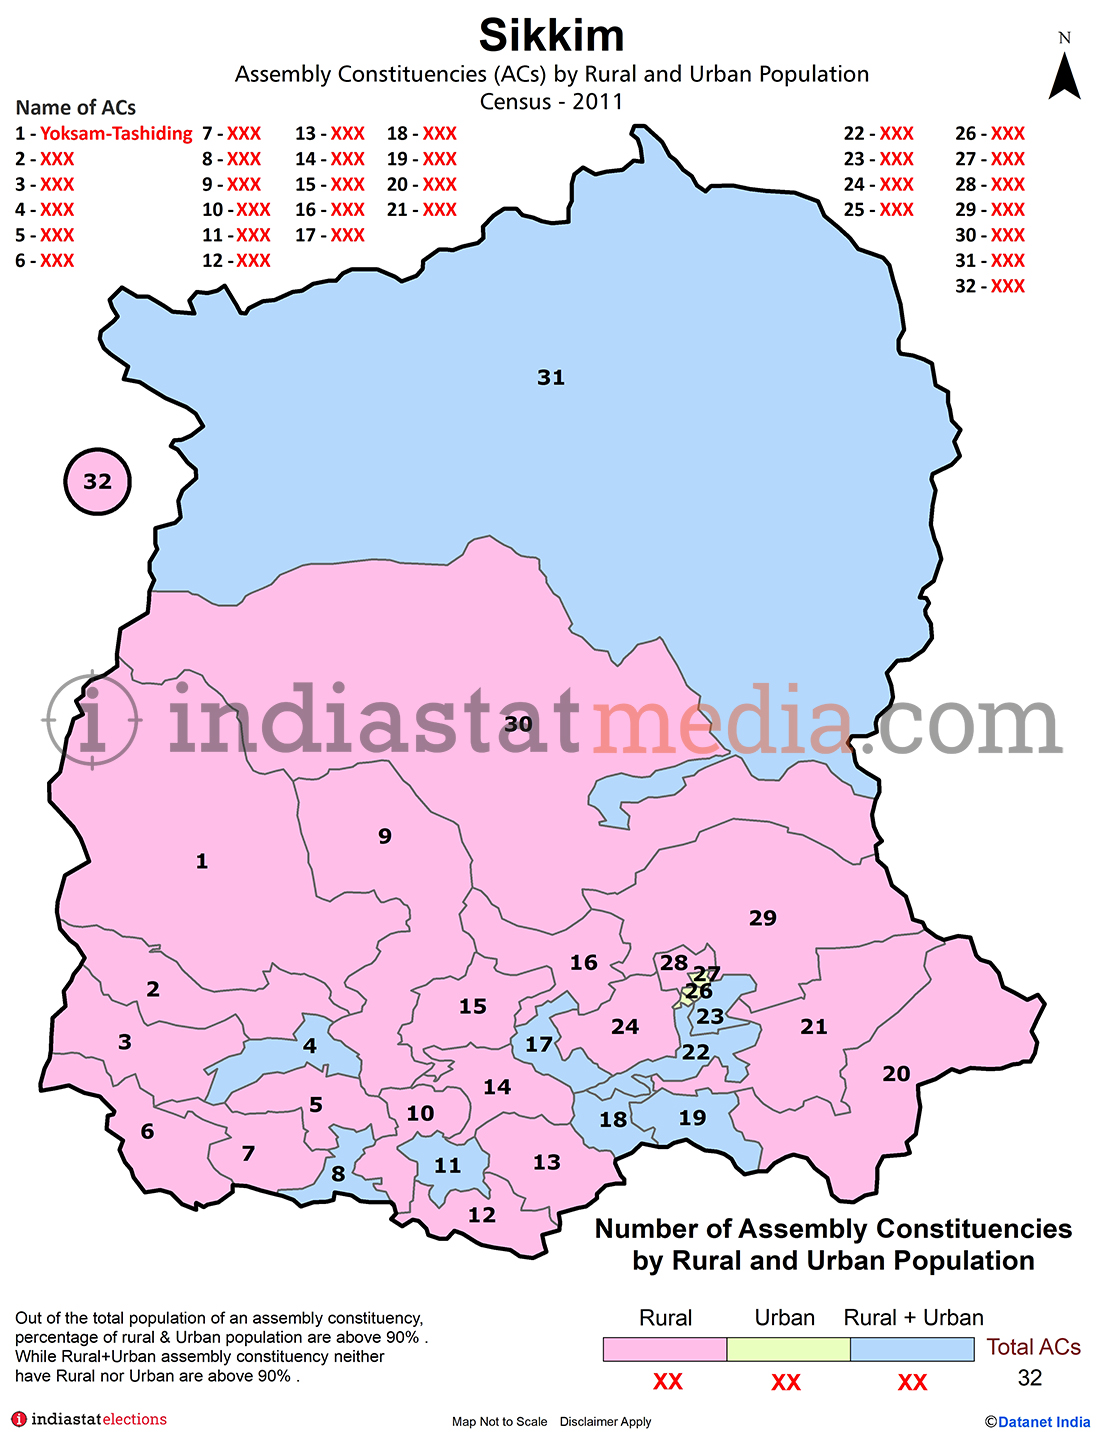 Assembly Constituencies by Rural and Urban Population in Sikkim - Census 2011